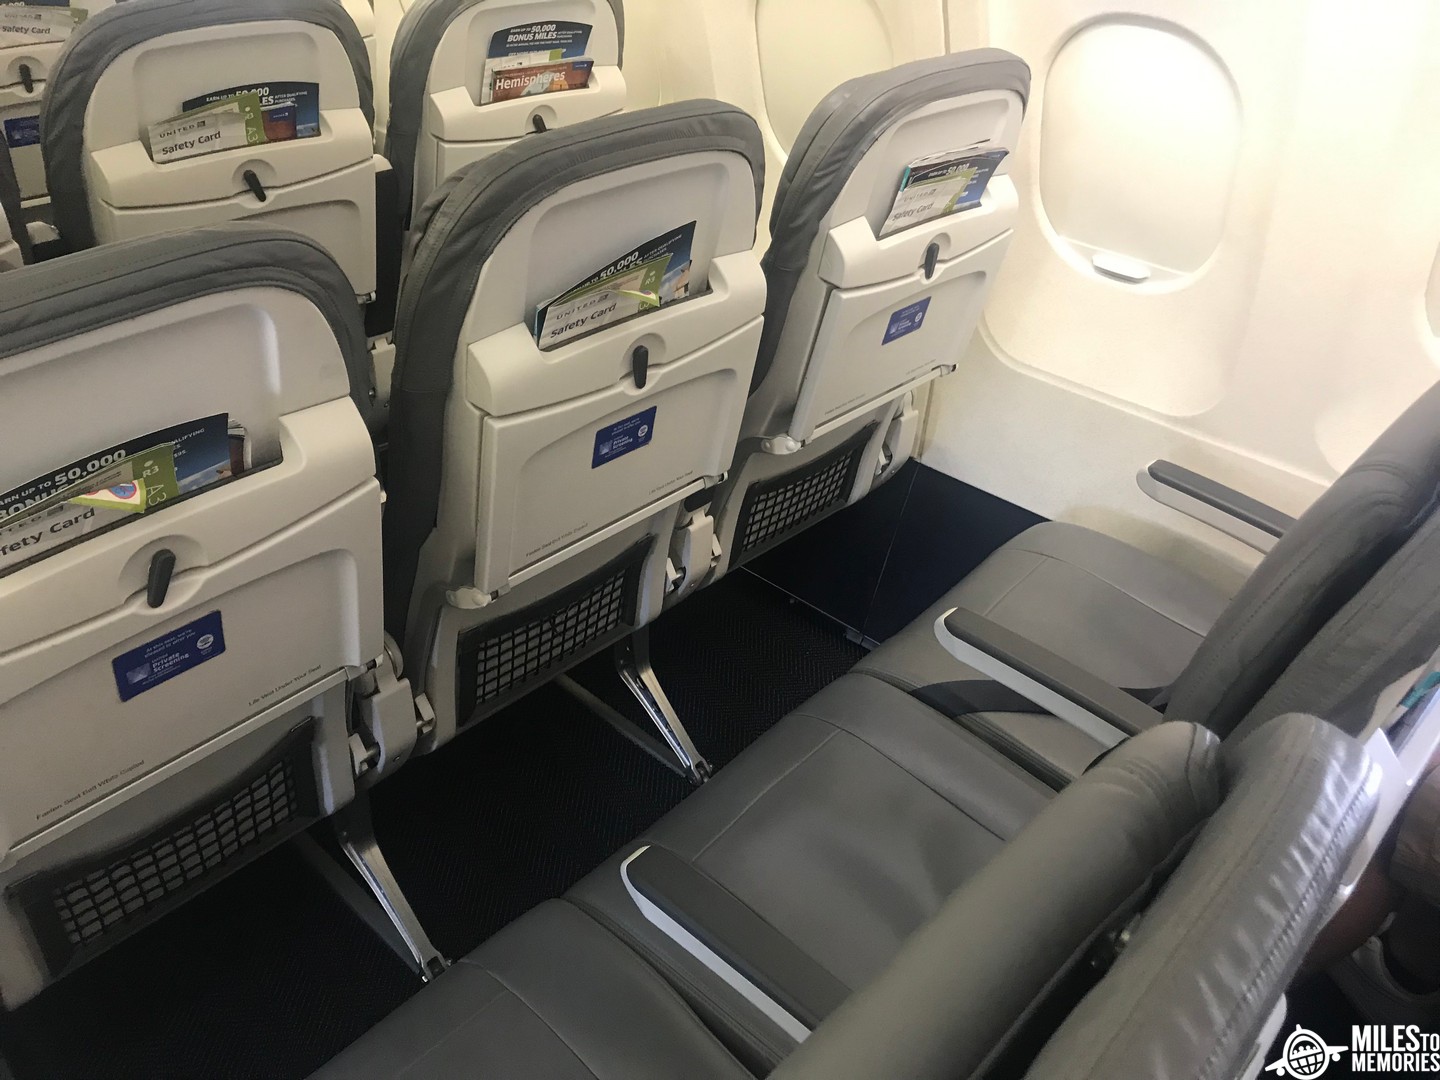 My Experience with United Economy Class